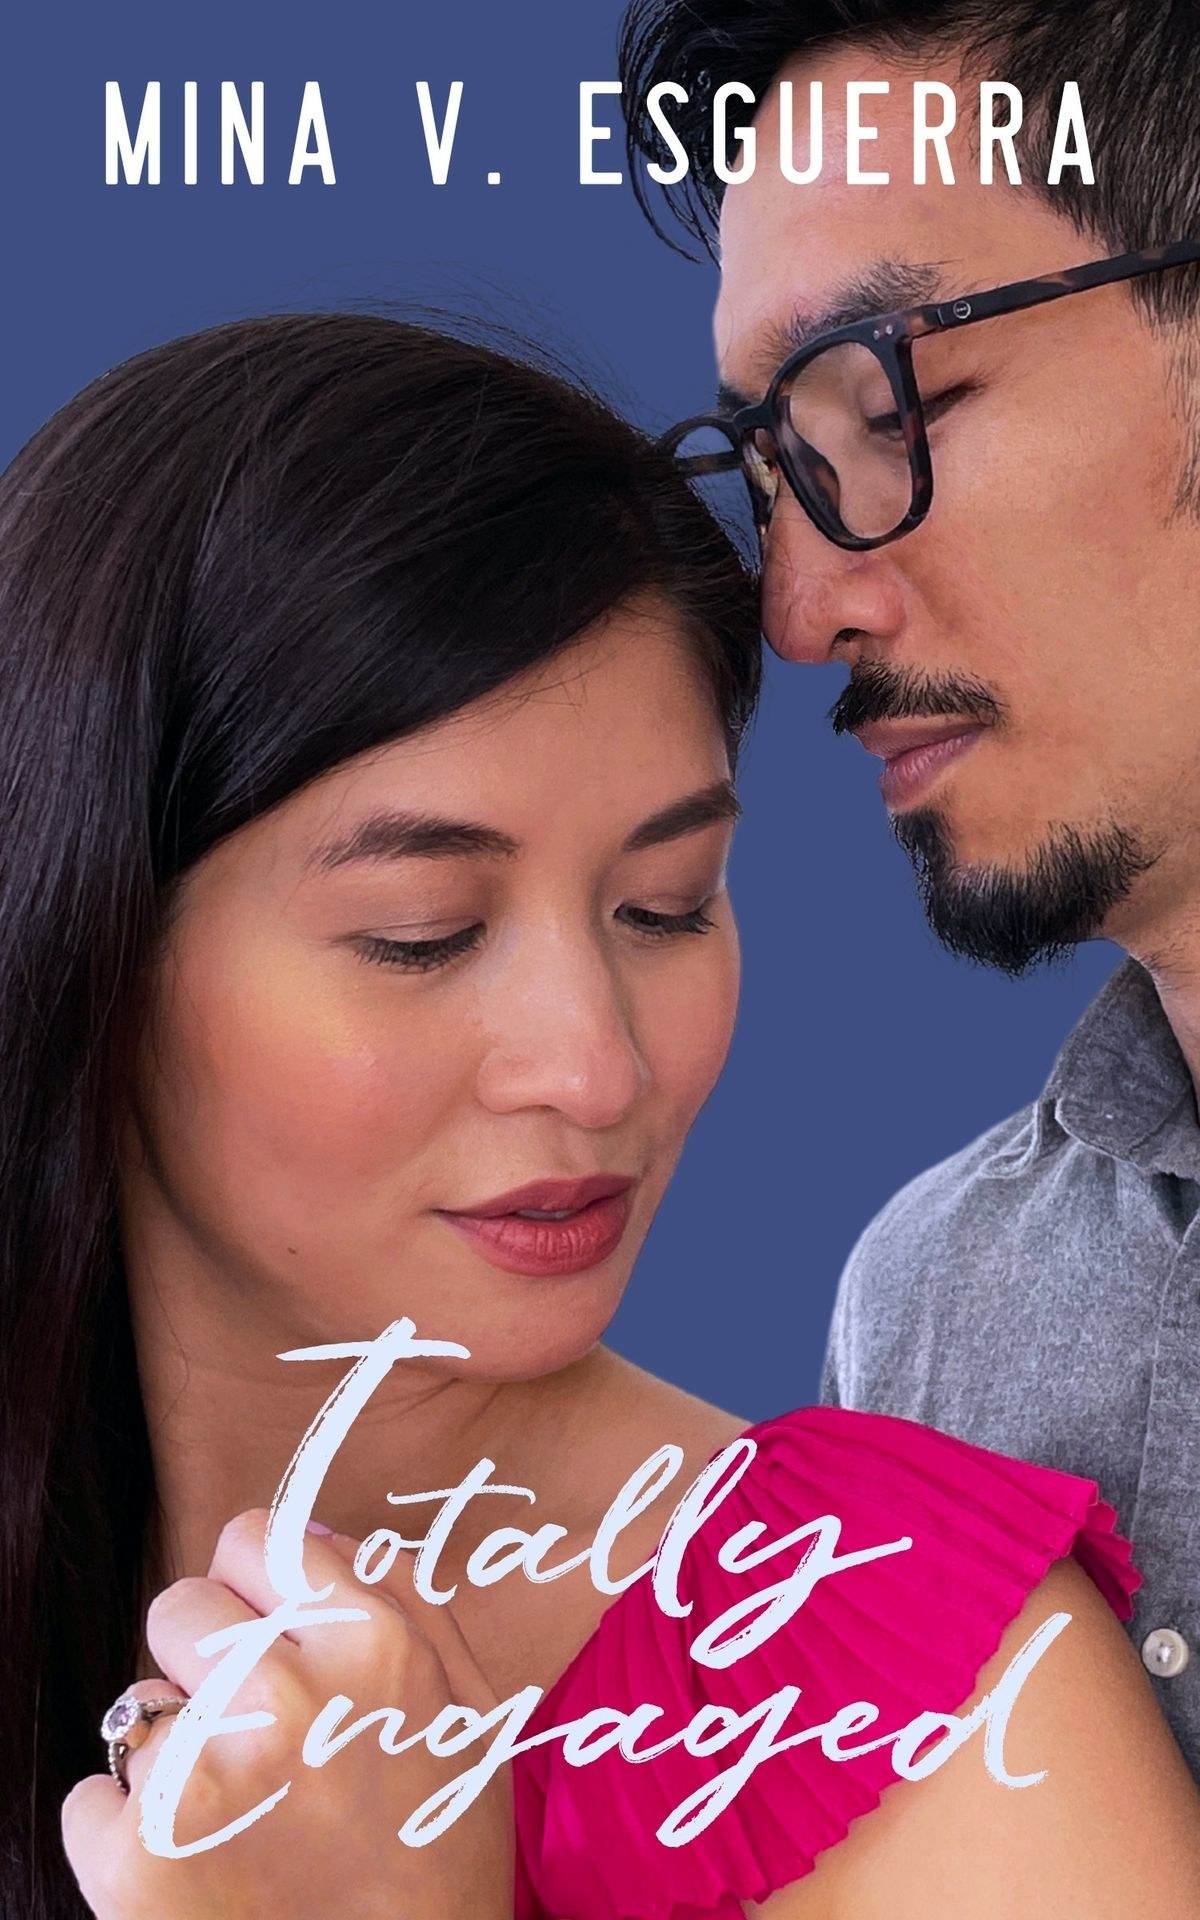 Totally Engaged cover. Book by Mina V. Esguerra